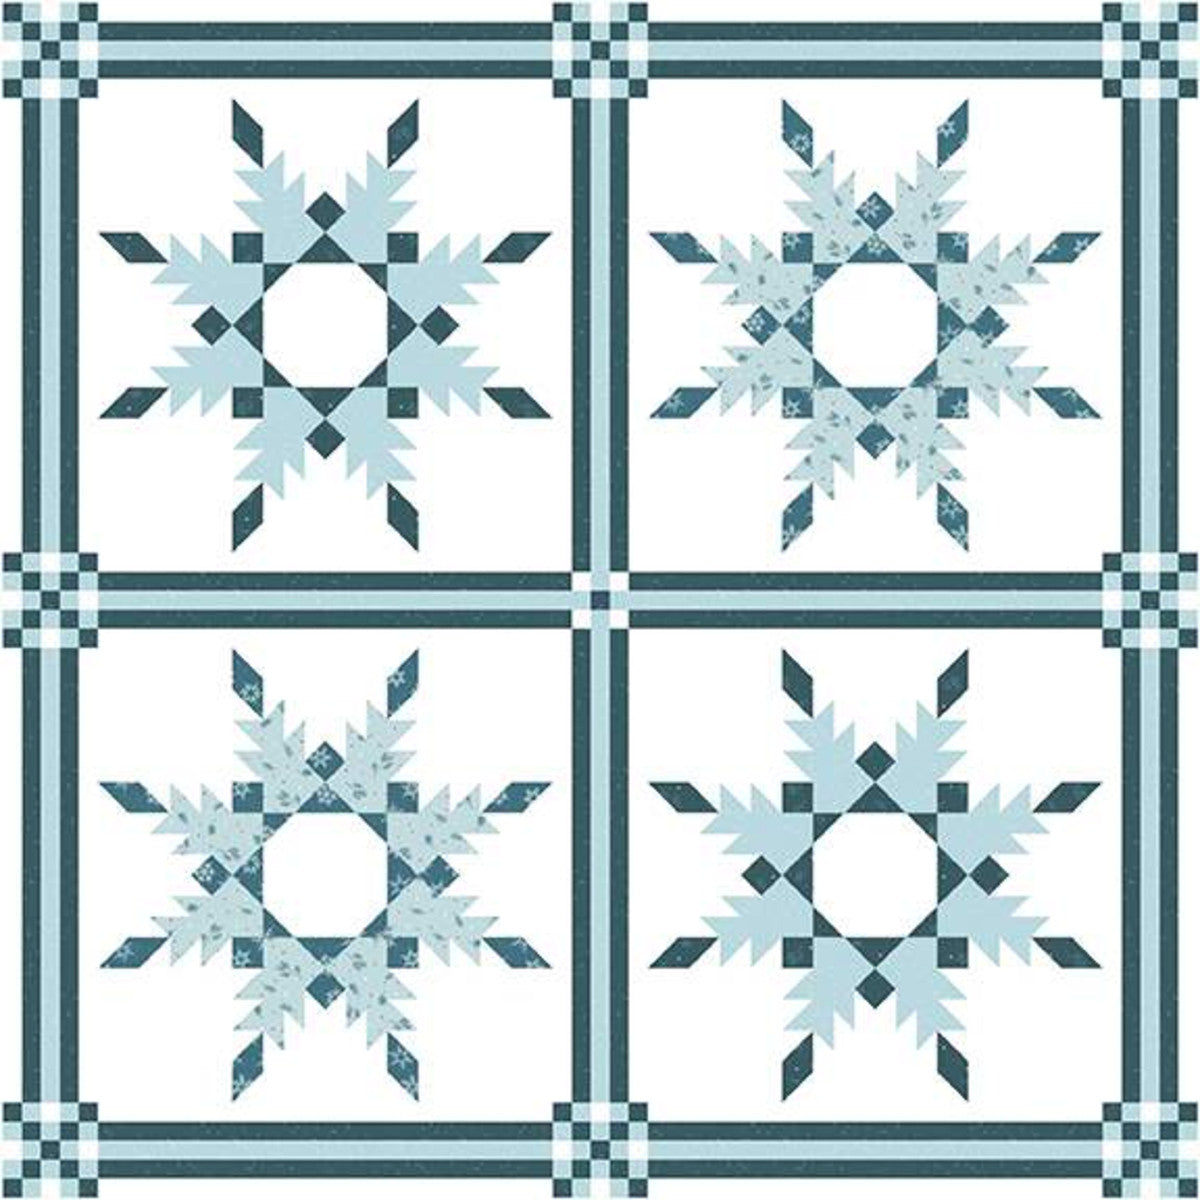 Snowfall Quilt Pattern by Material Girl Quilts